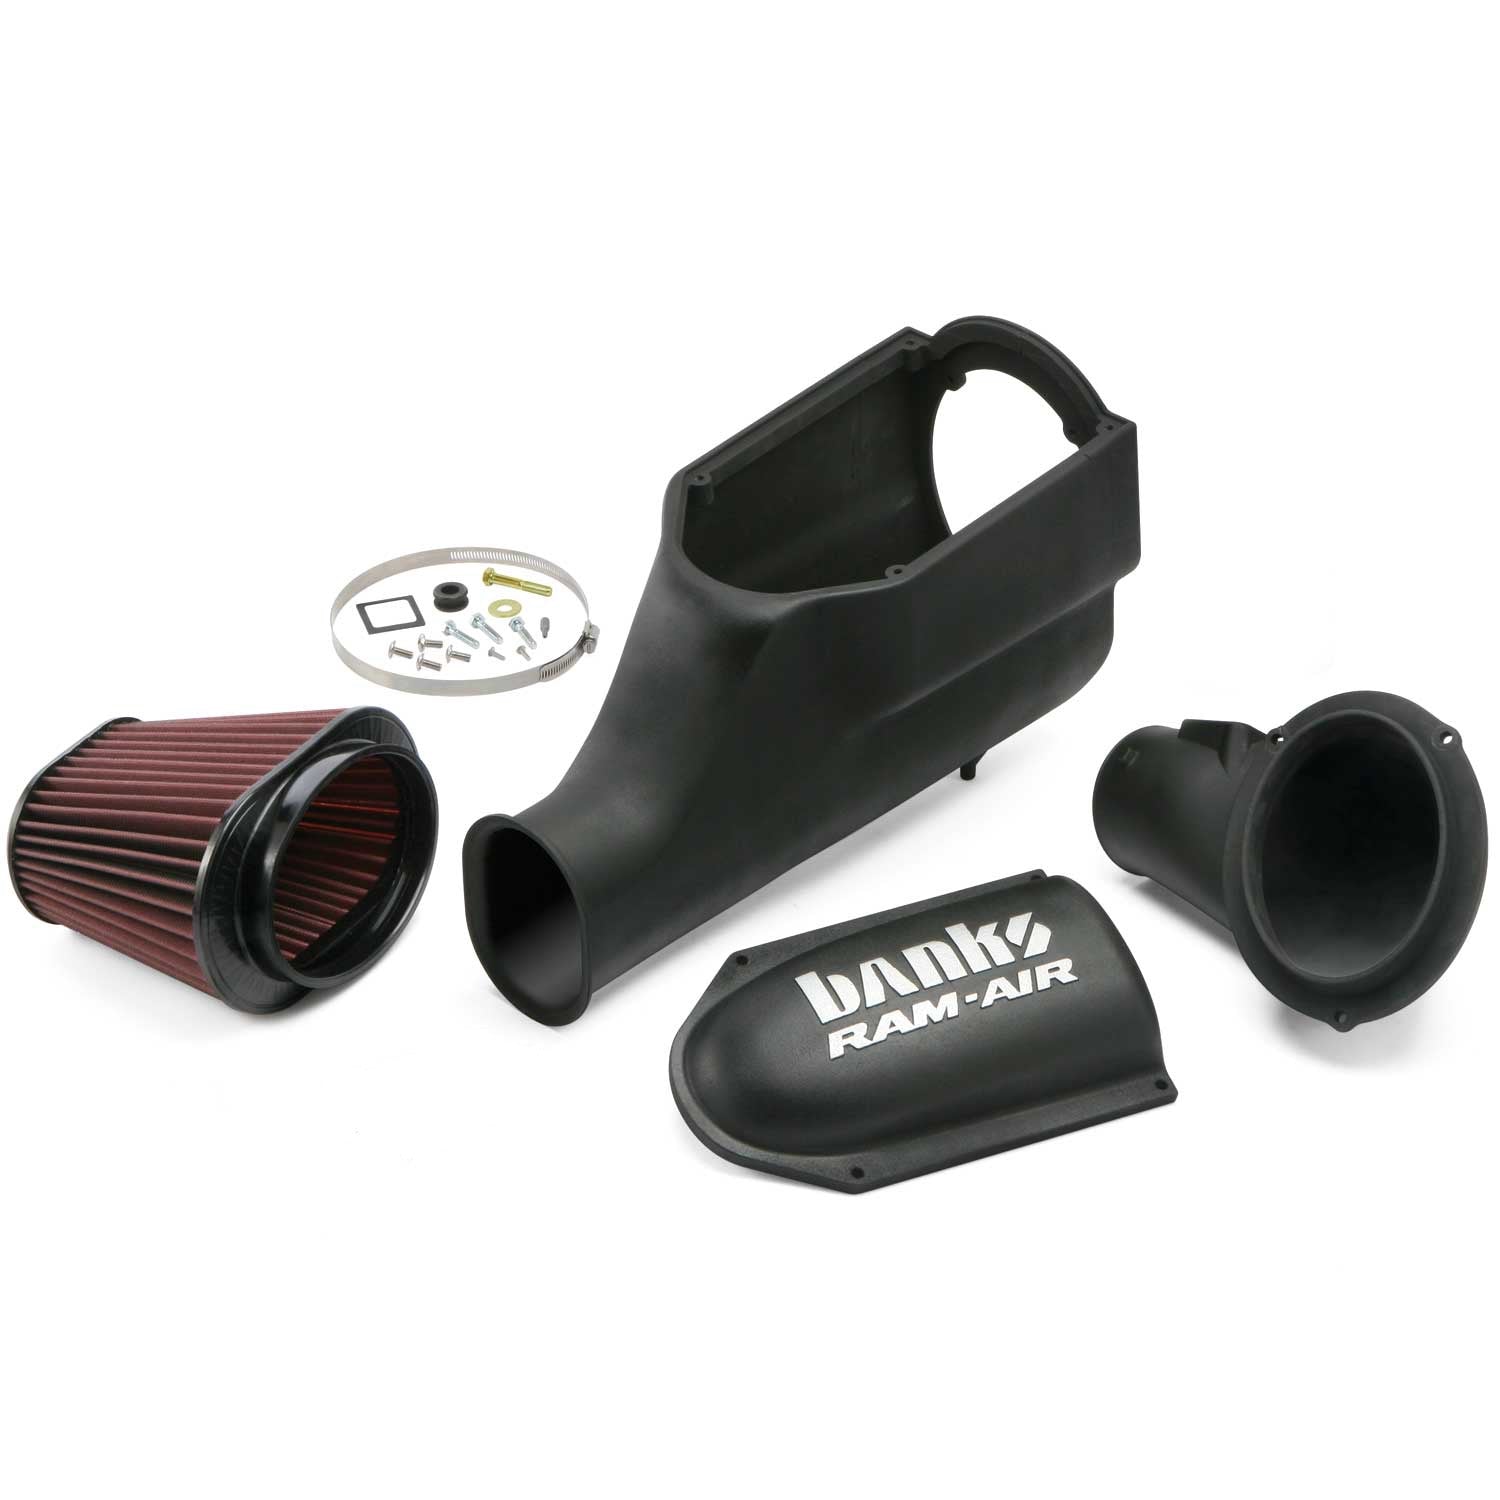 Components of the Banks Ram-Air intake for 2003-2007 Ford F250/F350 6.0L Power Stroke 42155